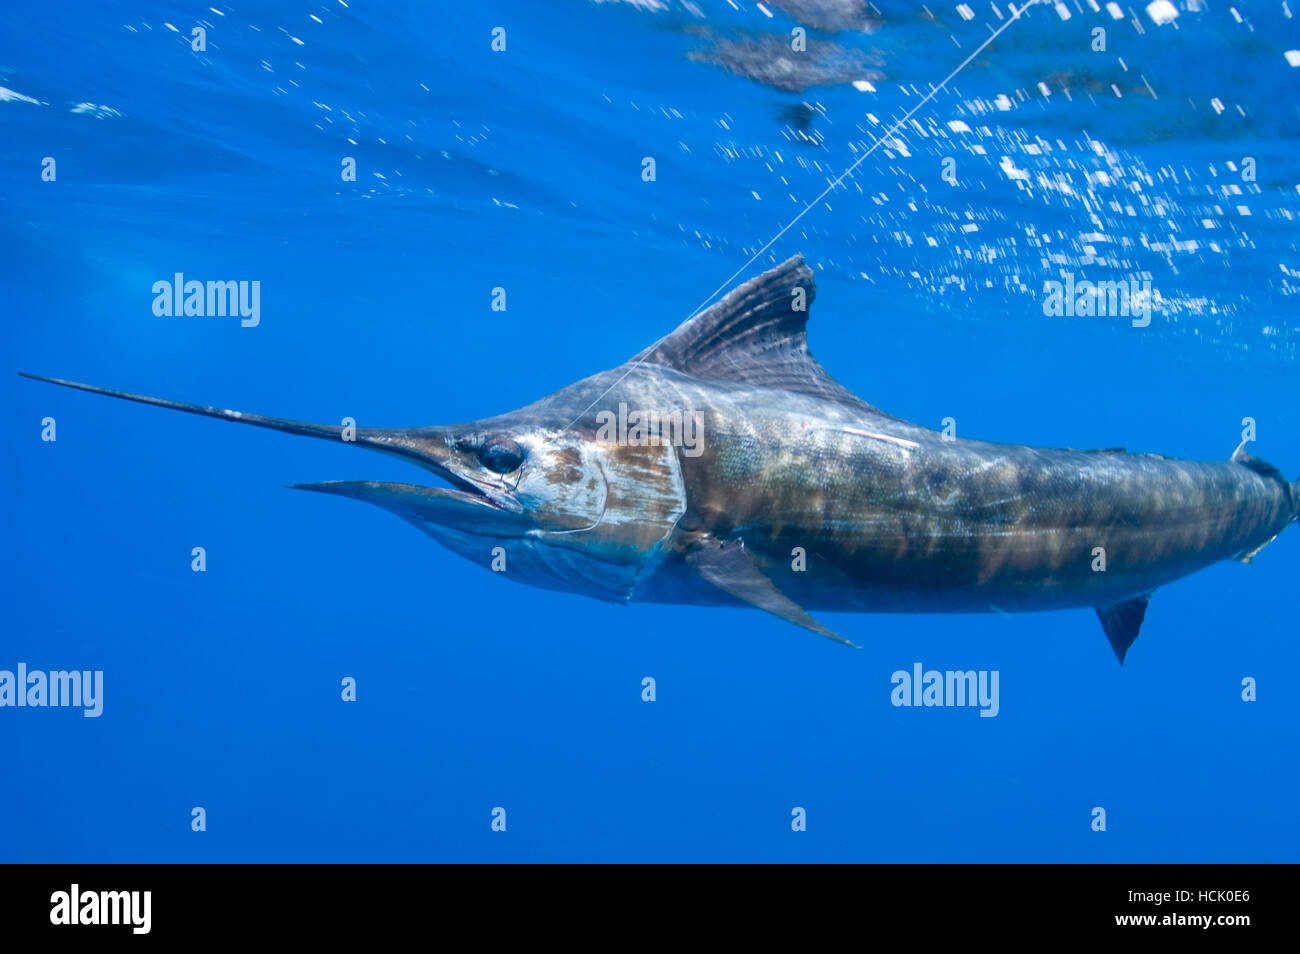 A sailfish fights a fishing line underwater Stock Photo - Alamy